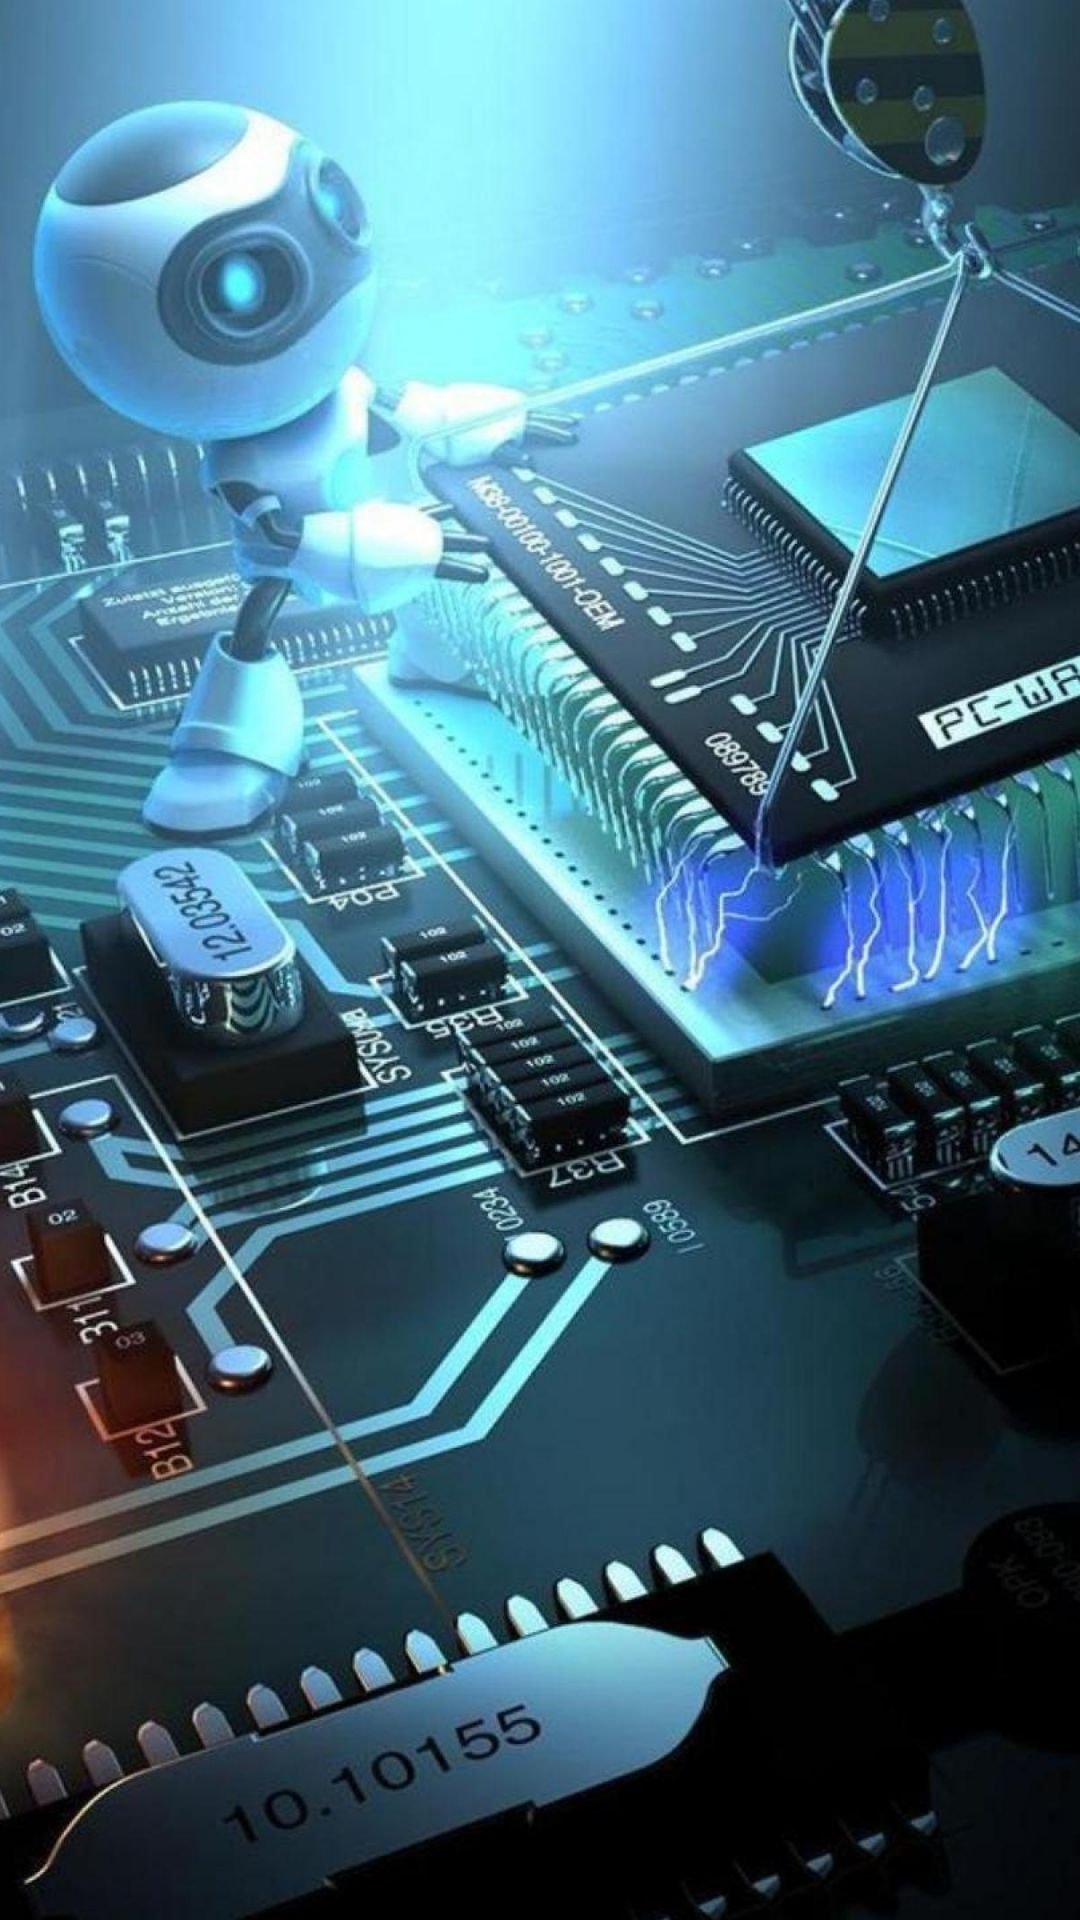 571,083 Electronics Engineering Images, Stock Photos, 3D objects, & Vectors  | Shutterstock